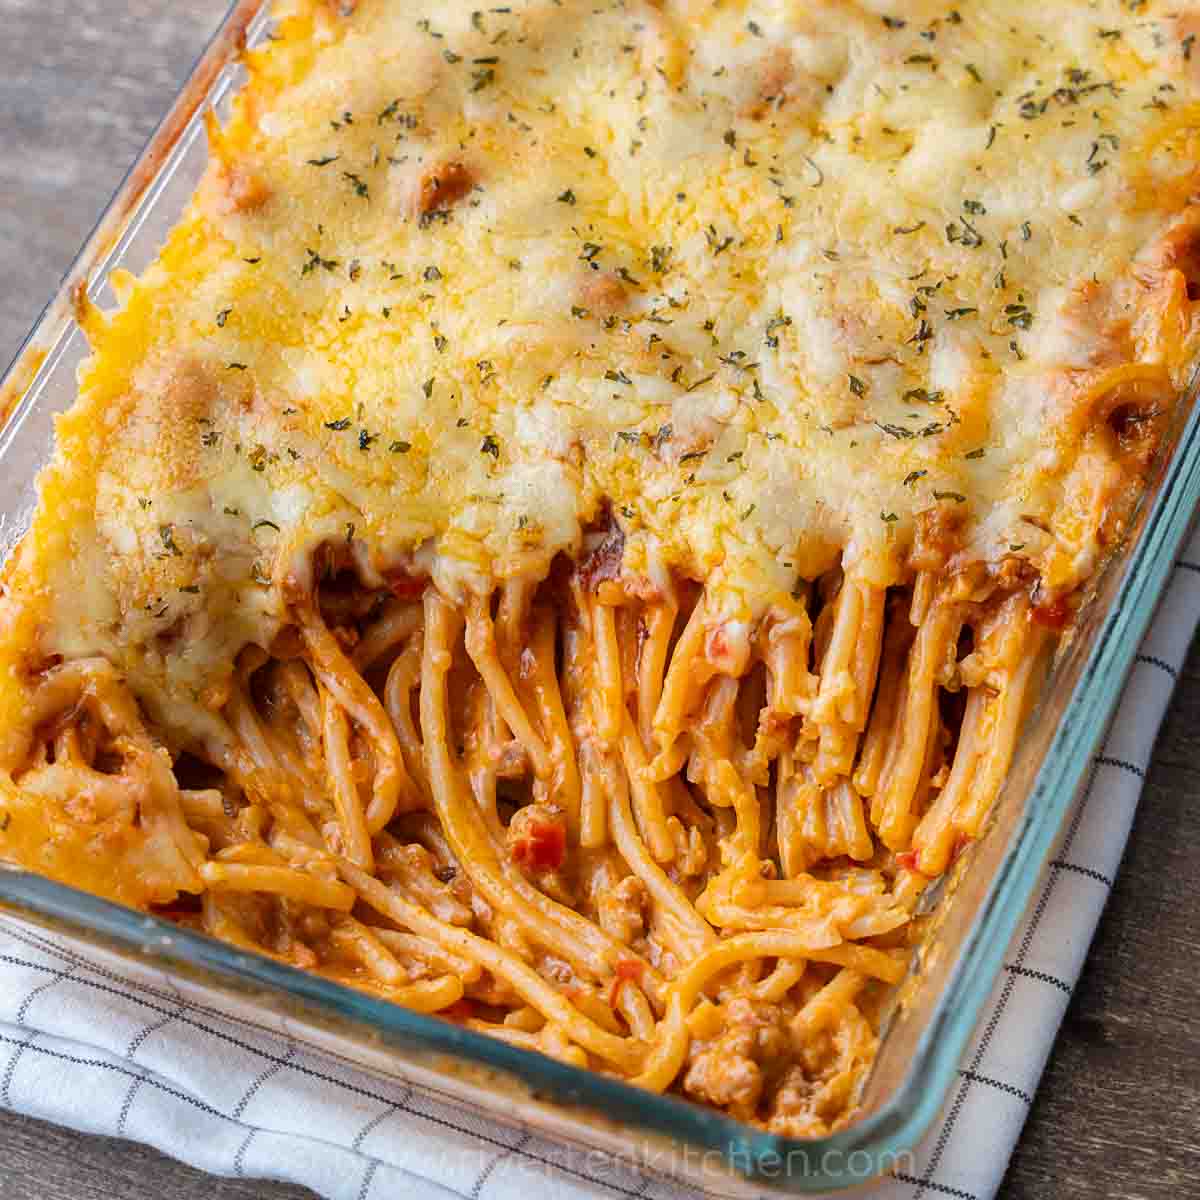 Baked Spaghetti with Cream Cheese